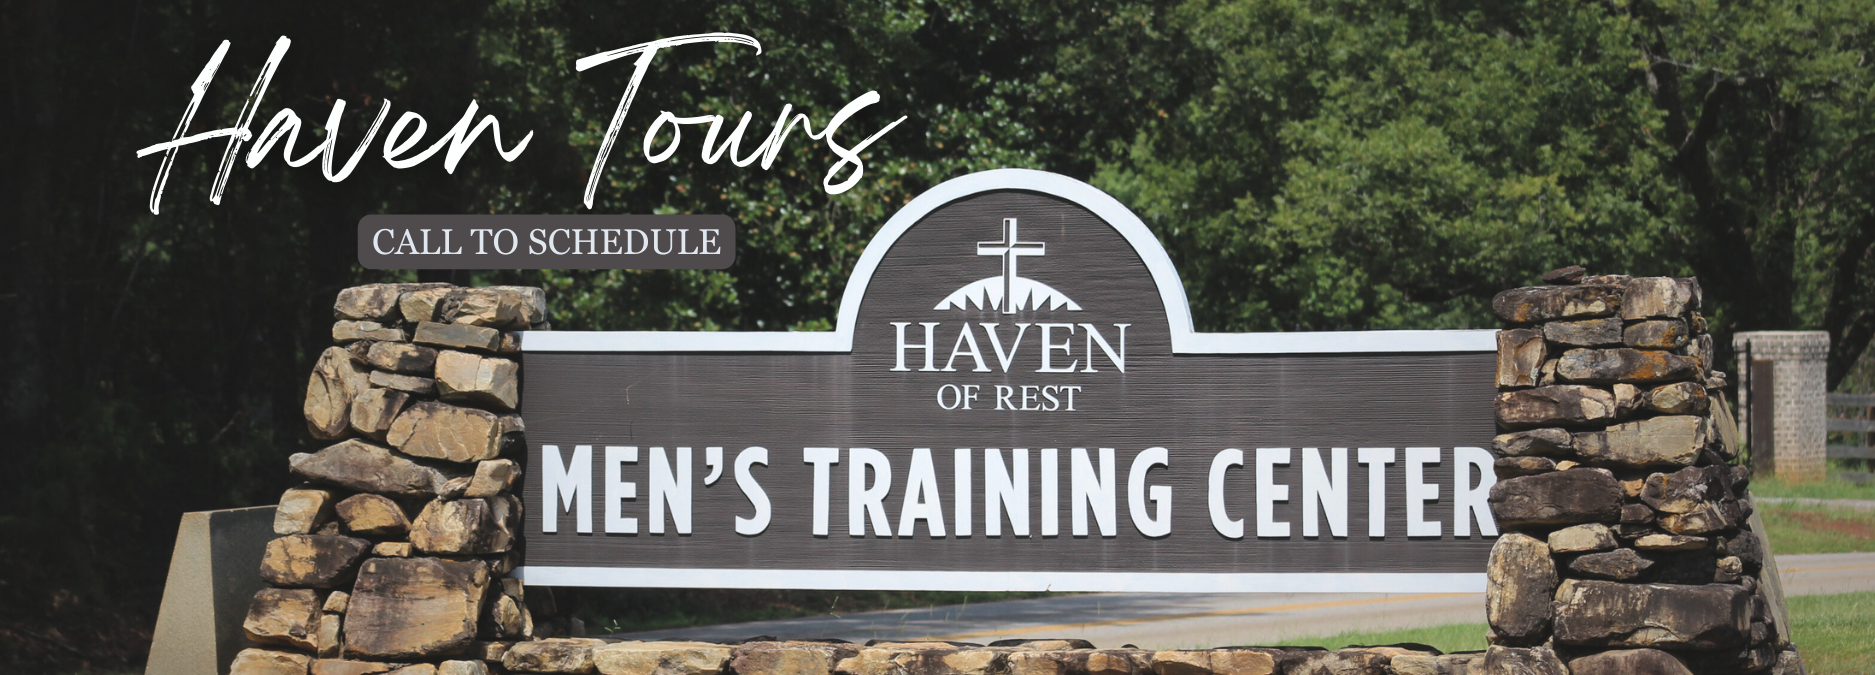 Haven Tours web banner.png